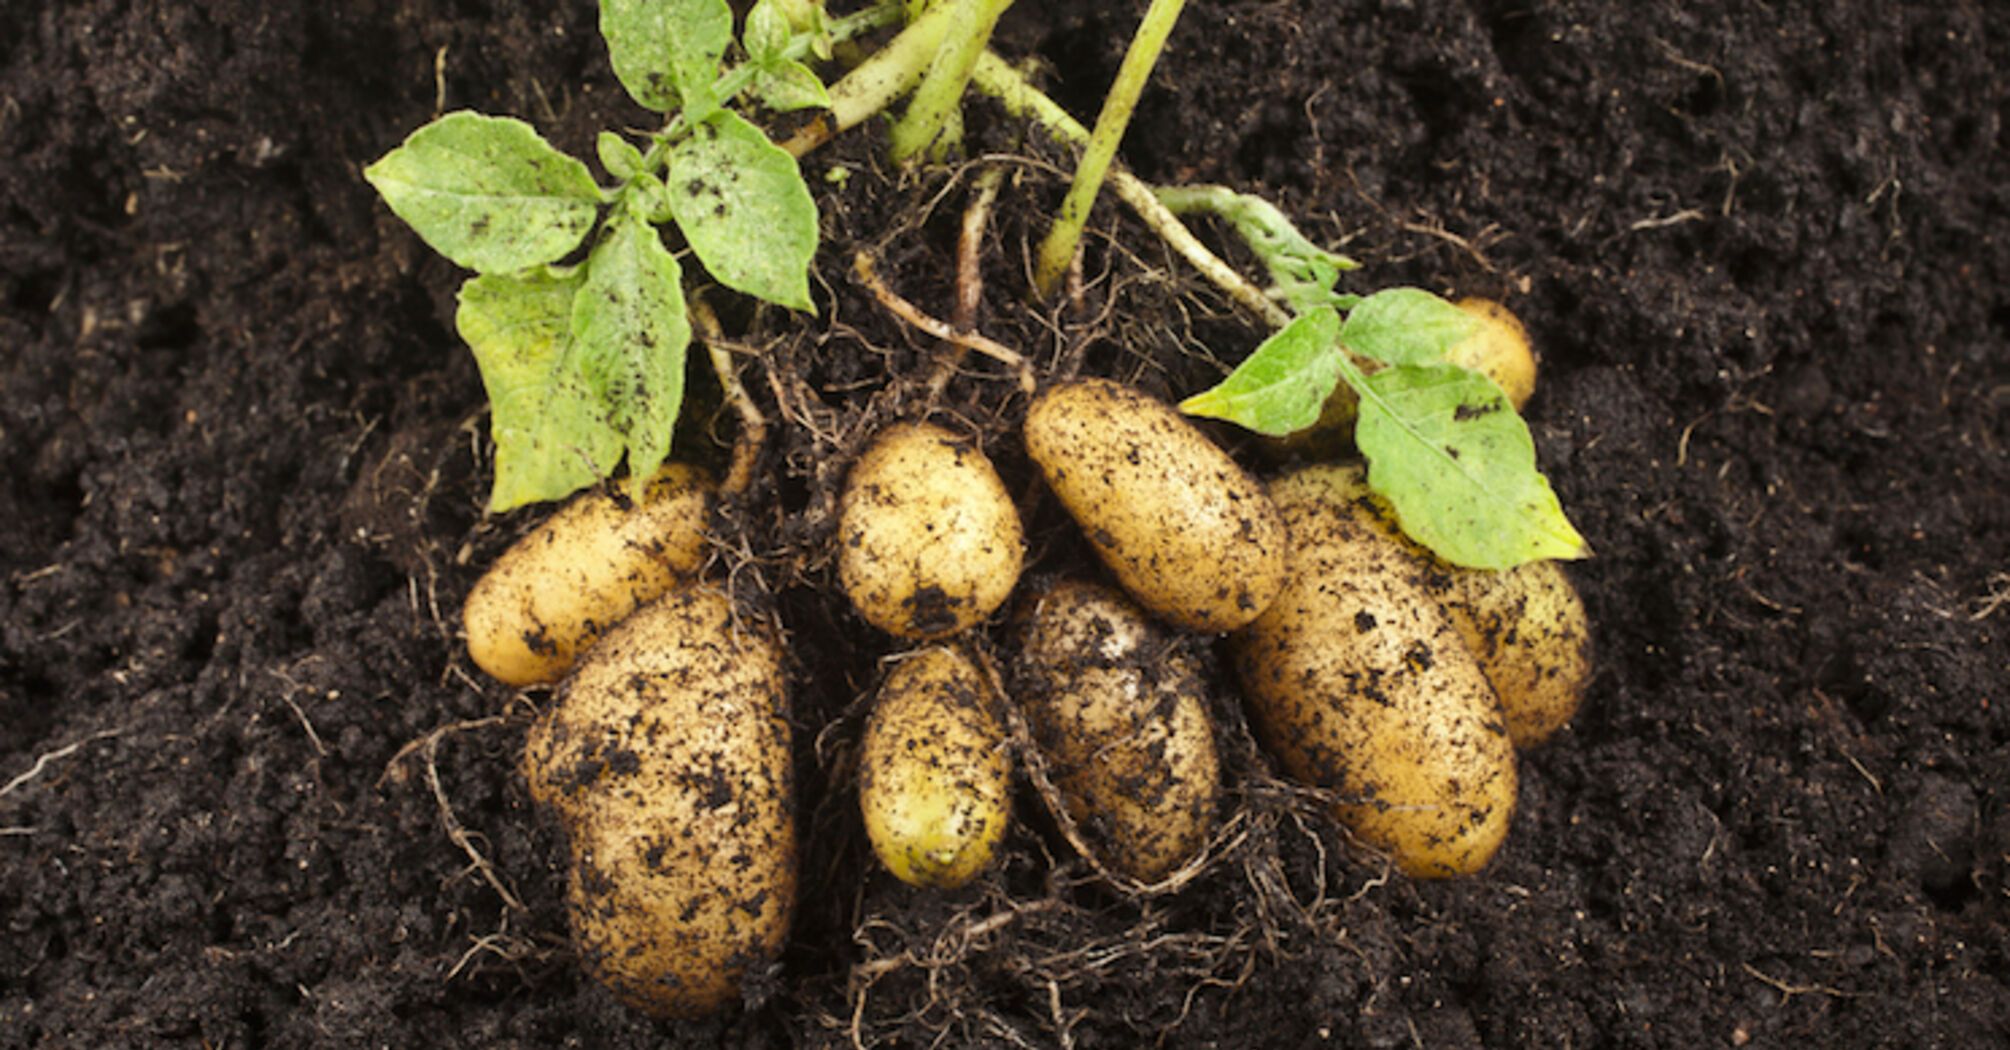 How to quickly plant potatoes without extra effort